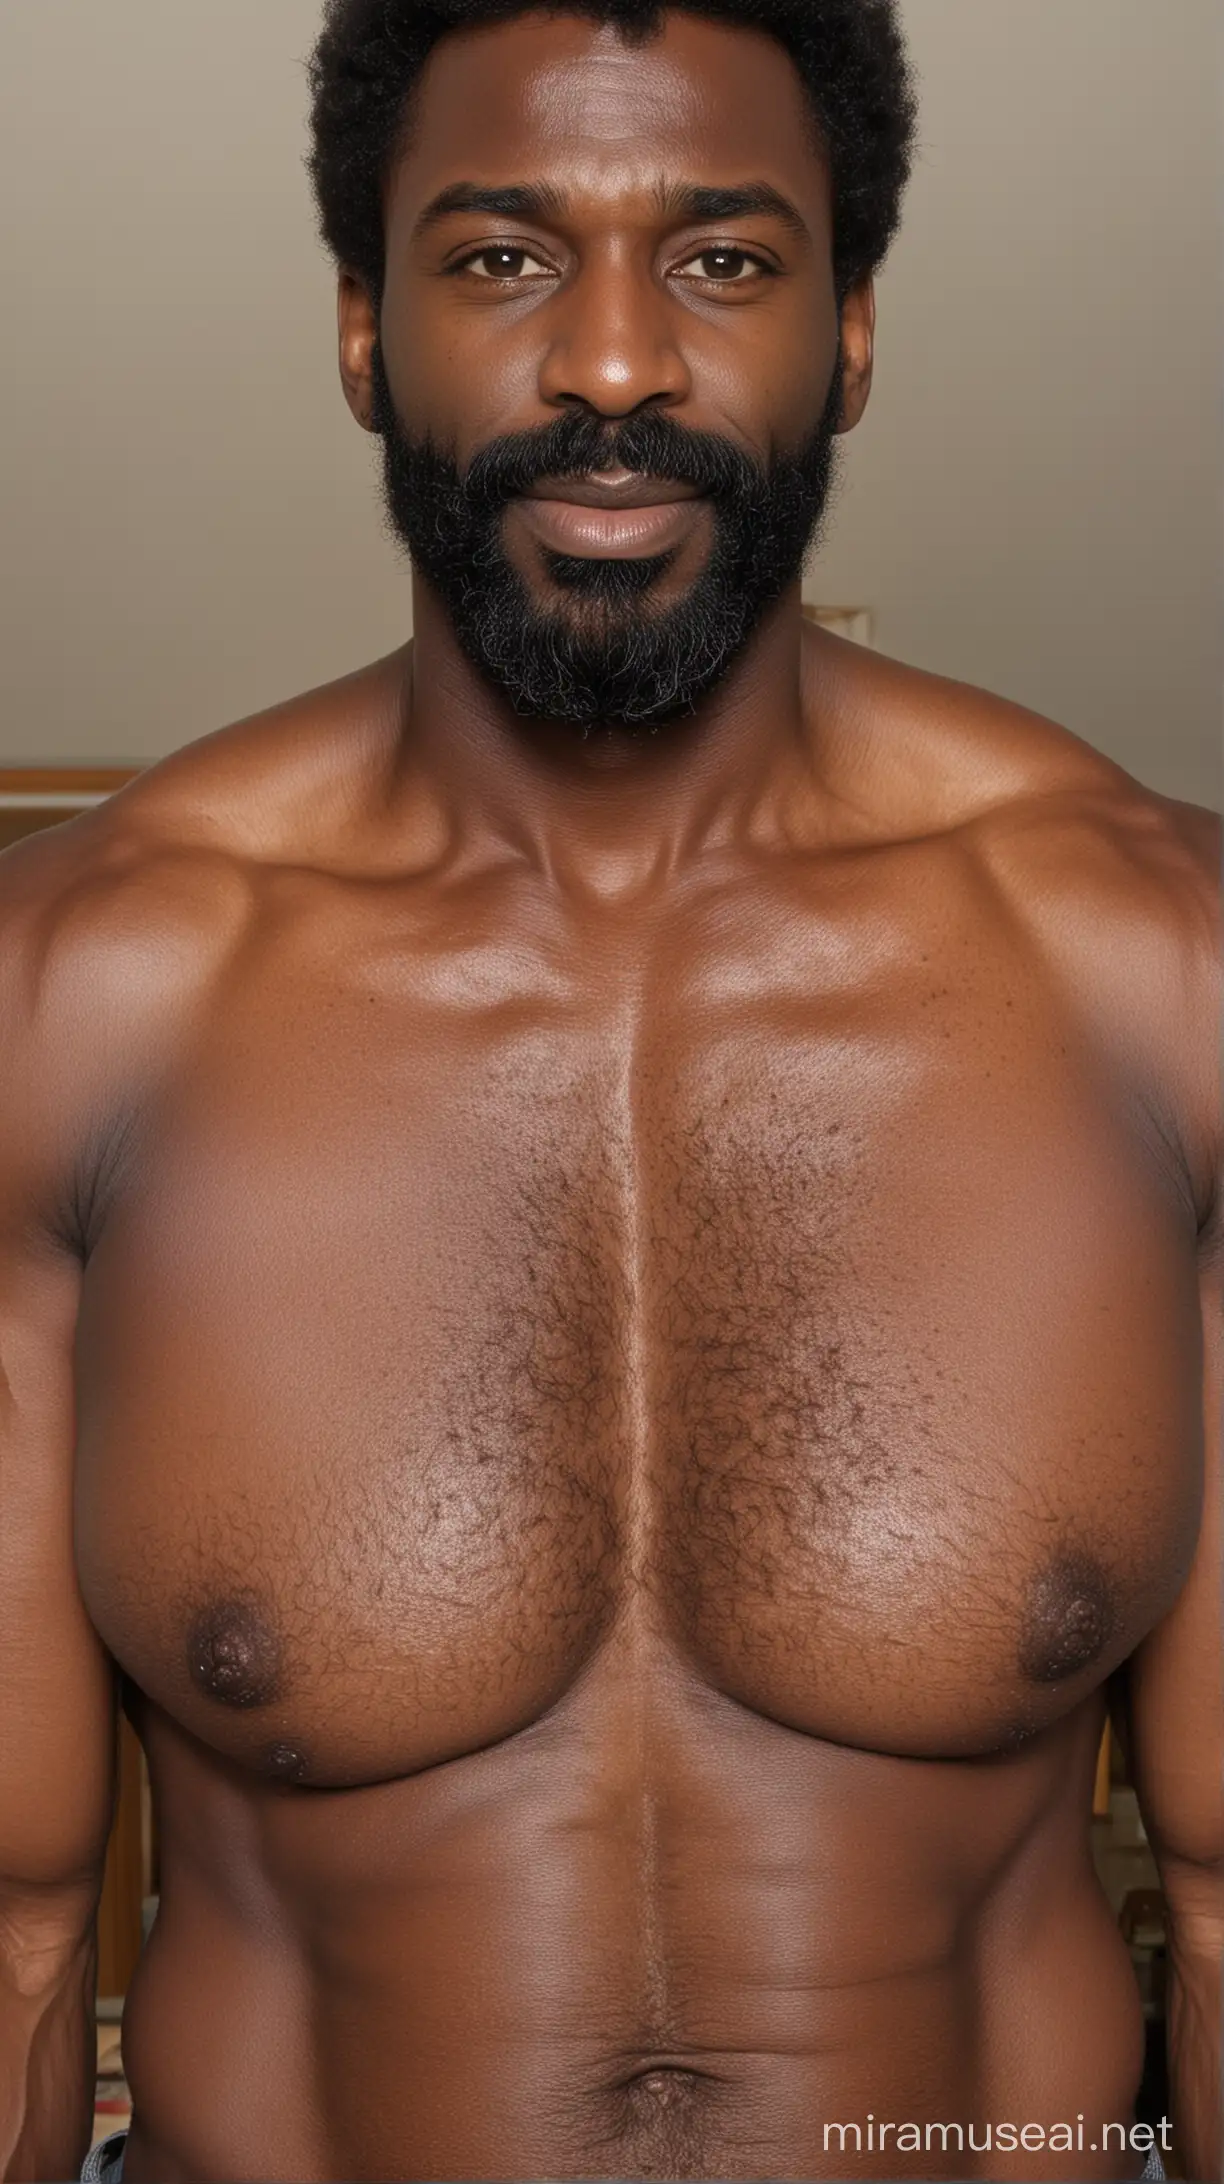 Muscular Middleaged Man with Broad Nose and Hairy Chest Showing Veins